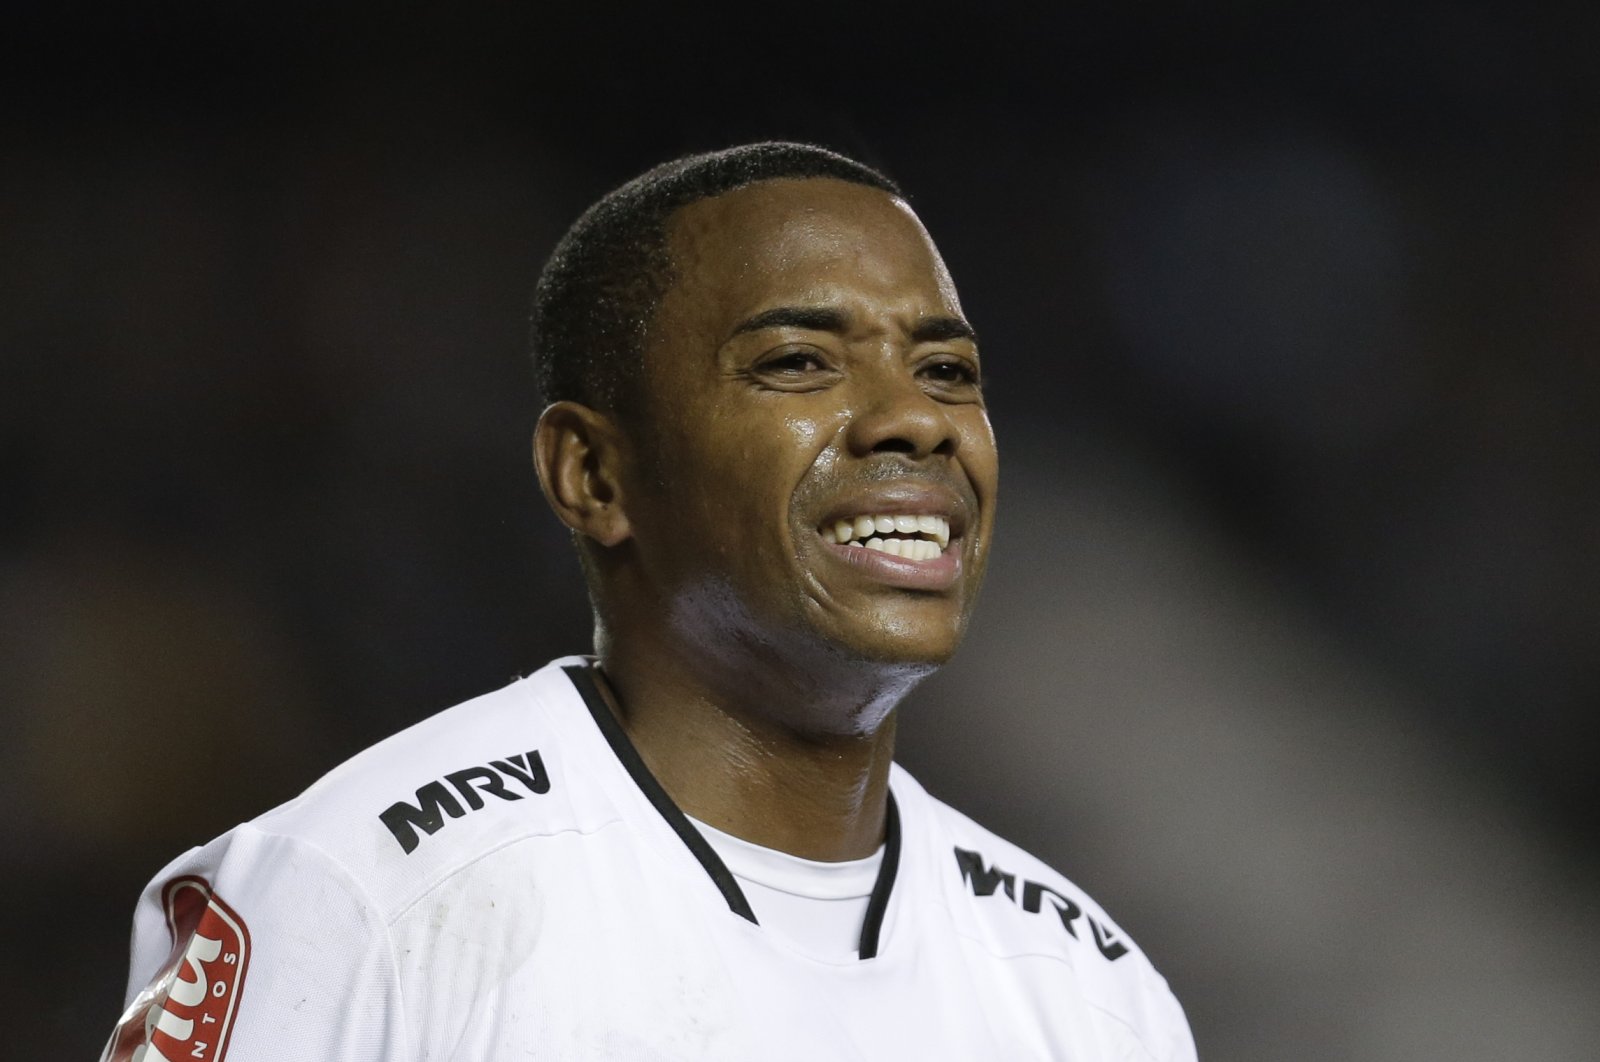 Atletico Mineiro&#039;s Robinho reacts during a Copa Libertadores match against Racing in Buenos Aires, Argentina, April 27, 2016. (AP Photo)